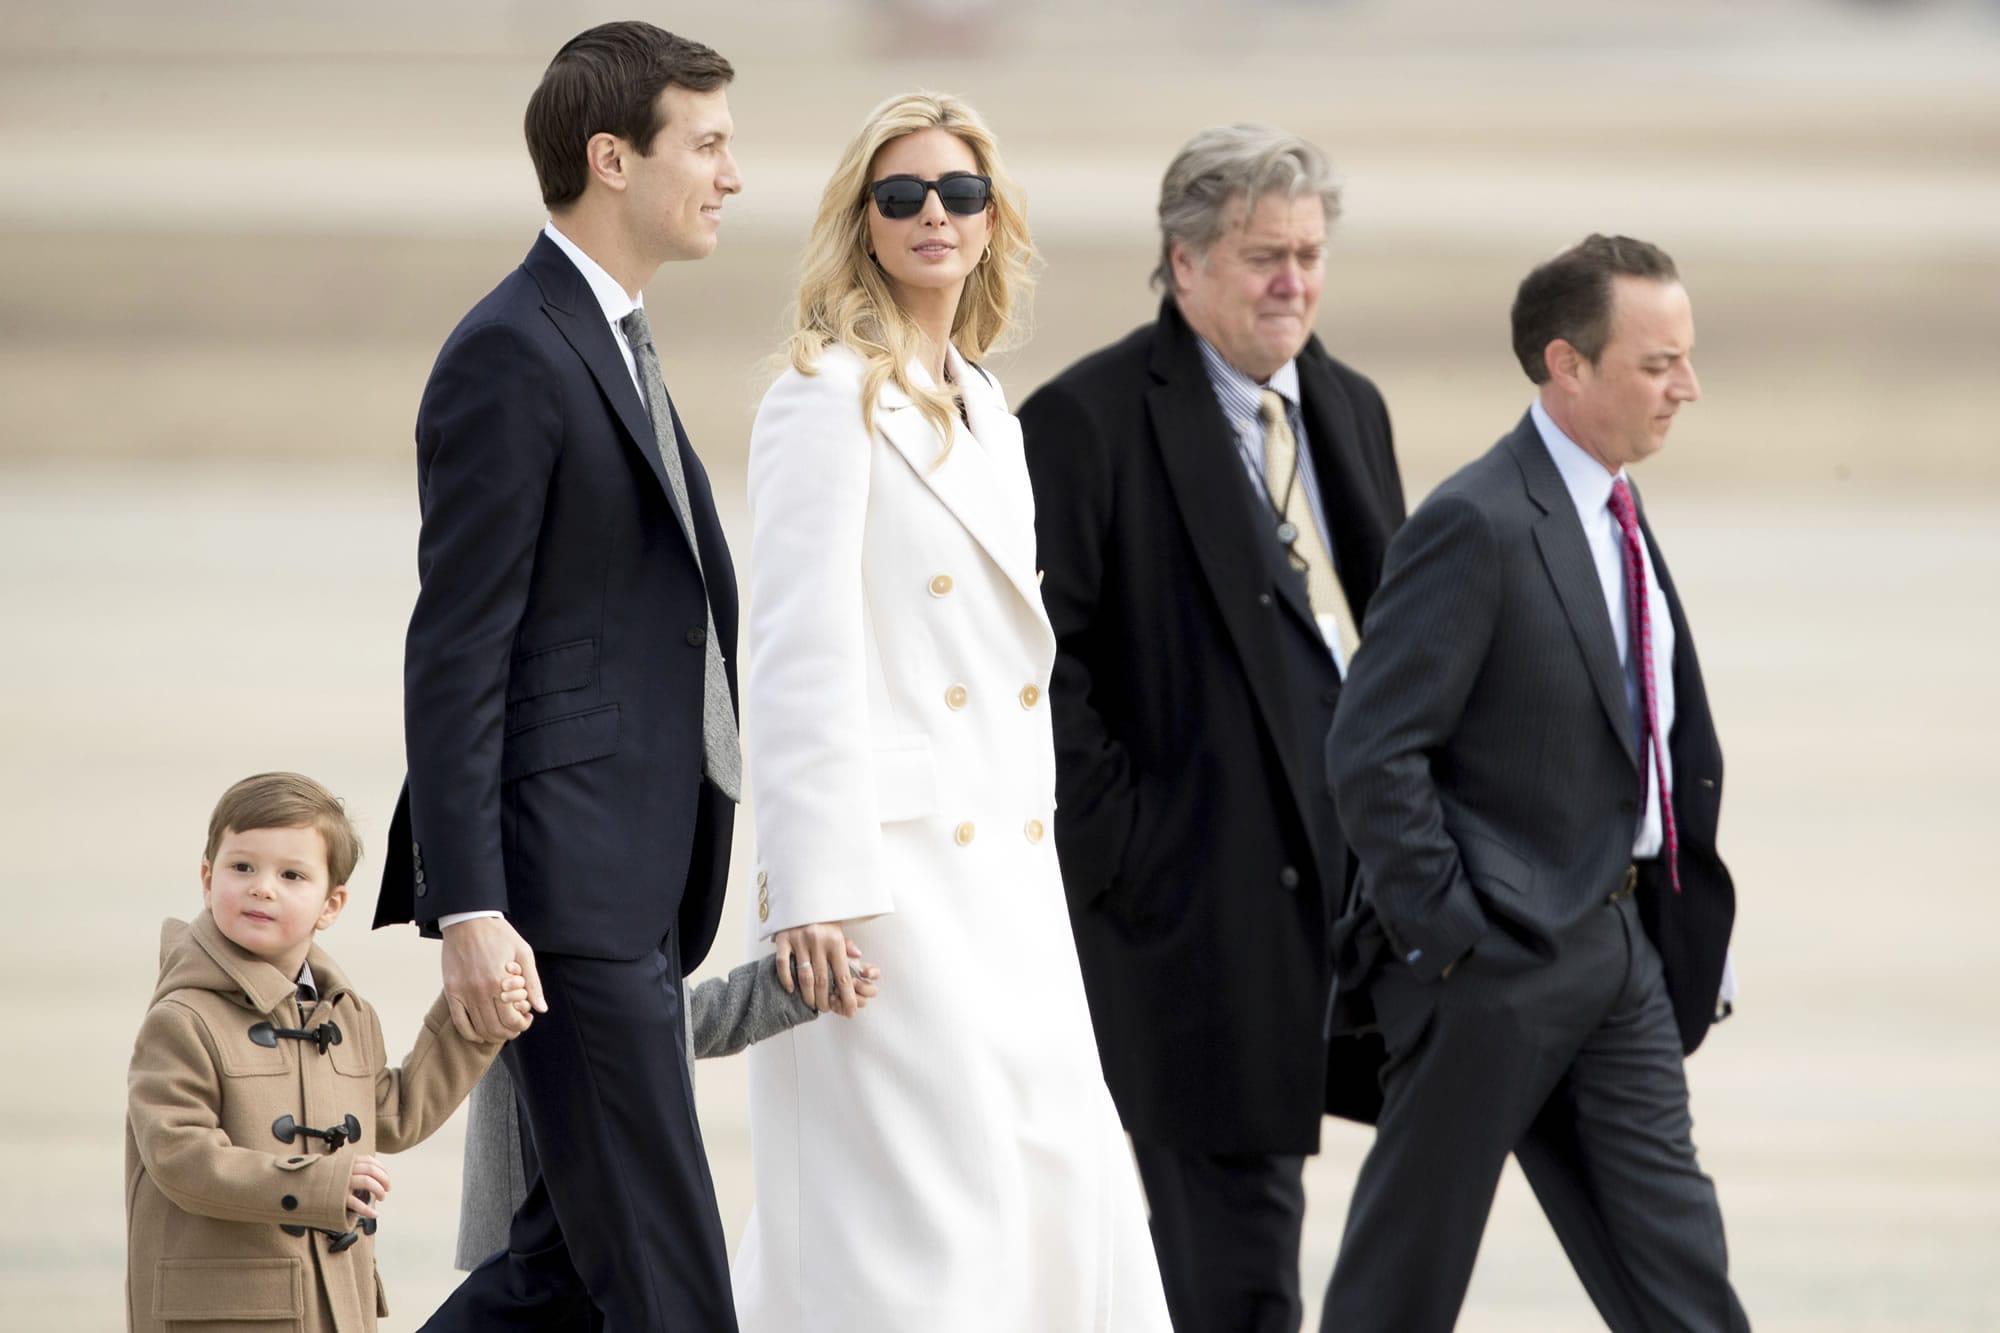 Ivanka Trump, daughter of President Donald Trump, her husband, senior adviser Jared Kushner, their two children Arabella Kushner and Joseph Kushner, Chief White House Strategist Steve Bannon, second from right, and Chief of Staff Reince Priebus, right, walk to Air Force One at Andrews Air Force Base in Md., Friday, Feb. 17, 2017. Trump is visiting Boeing South Carolina to see the Boeing 787 Dreamliner before heading to his estate Mar-a-Lago in Palm Beach, Fla., for the weekend.